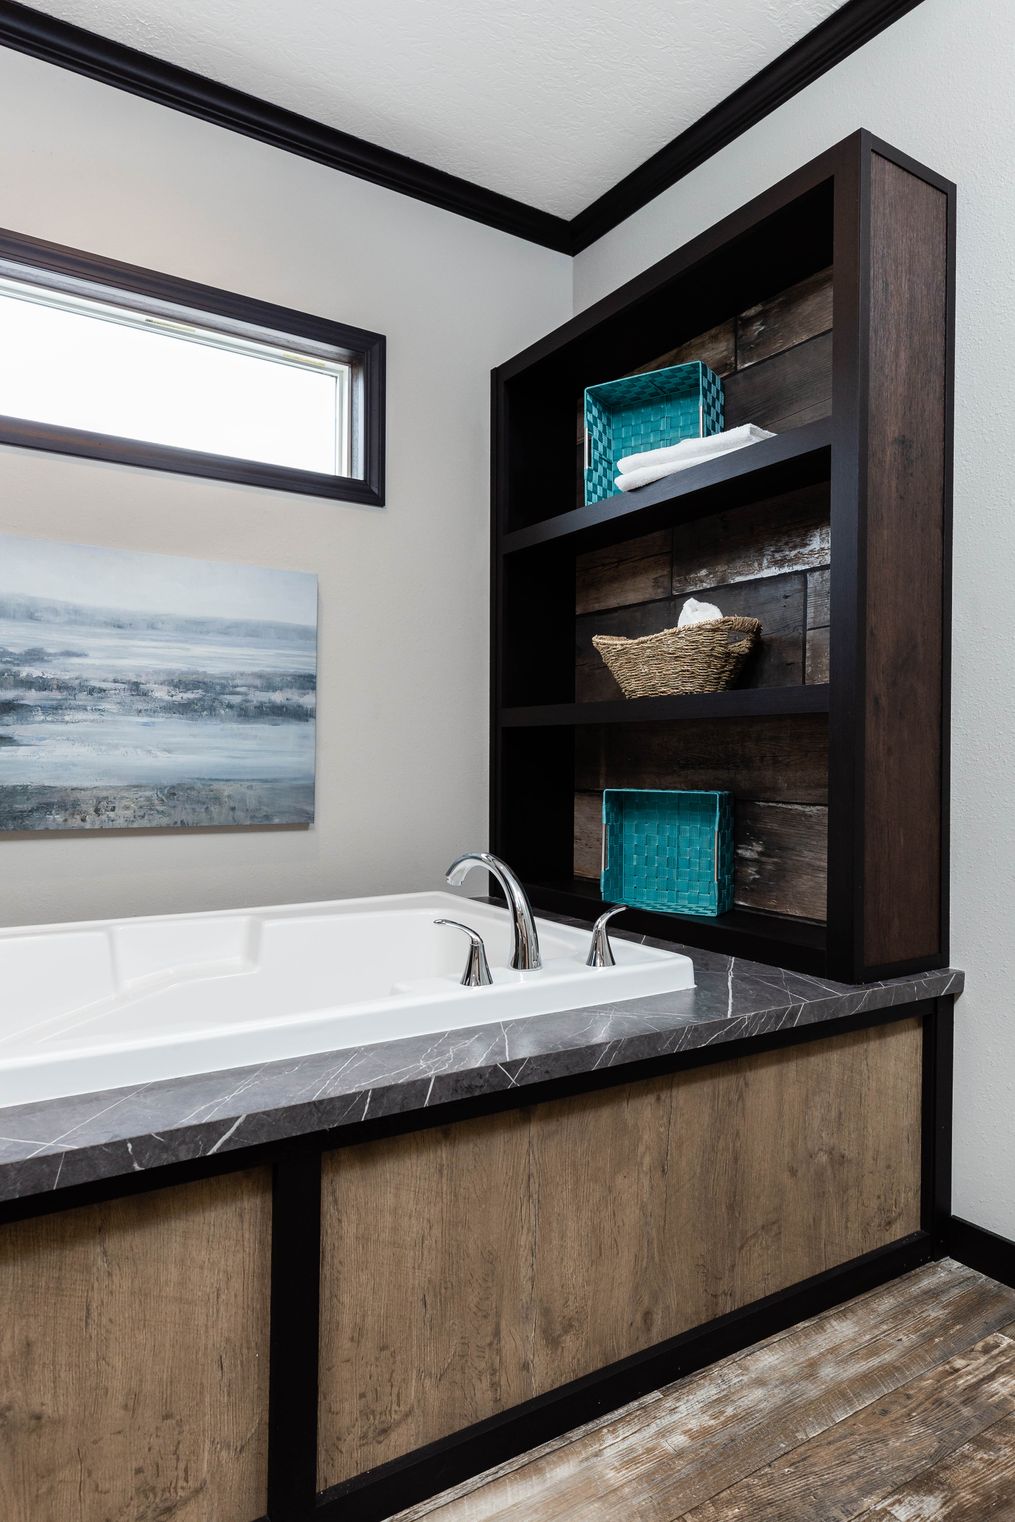 The BOUJEE XL Master Bathroom. This Manufactured Mobile Home features 4 bedrooms and 3 baths.